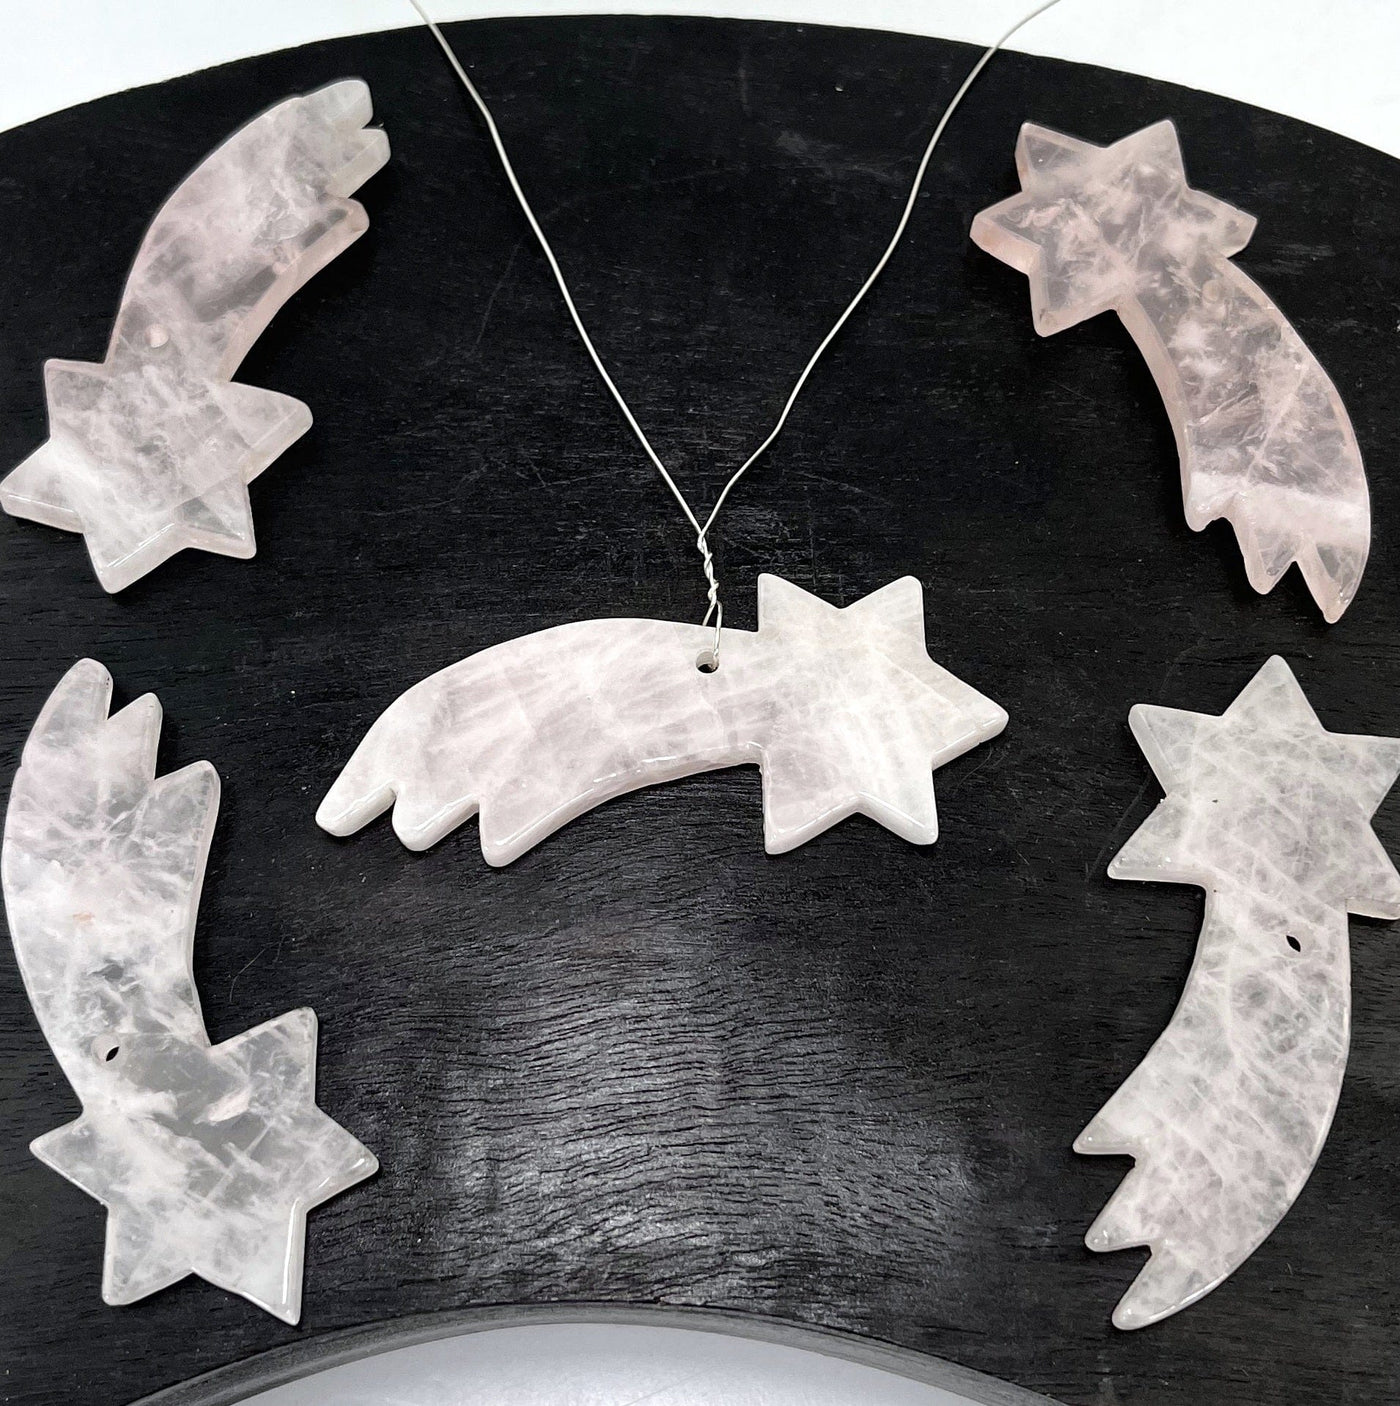 multiple shooting star top drilled pendants with center pendant shown as a wired necklace